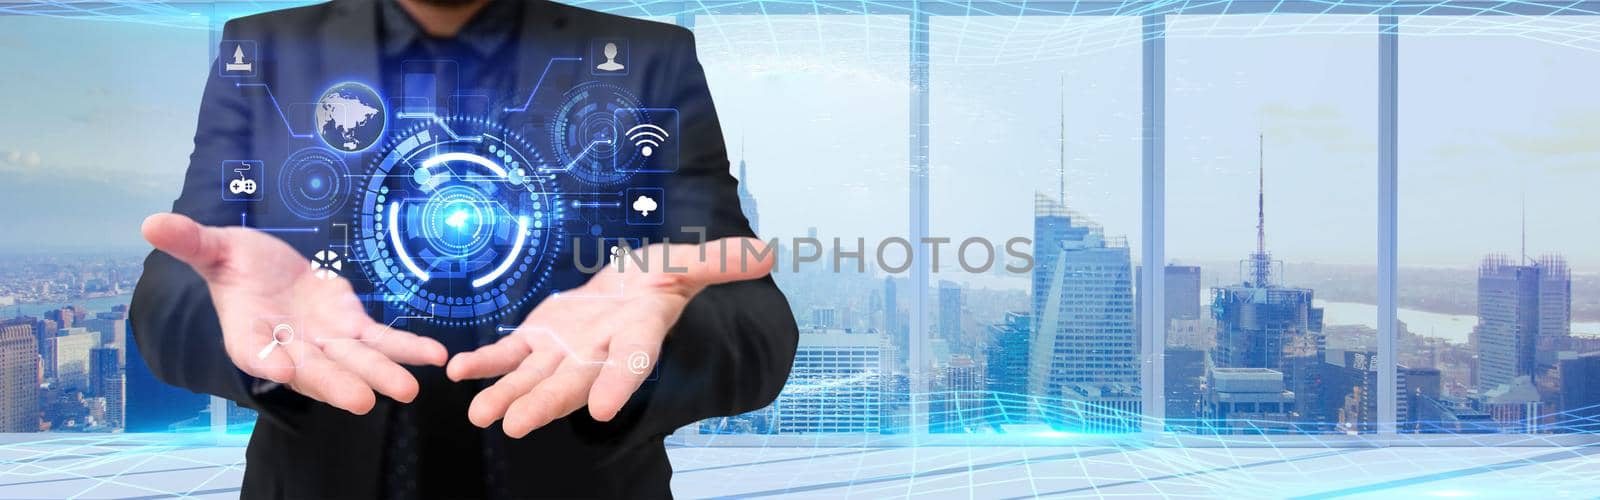 Picture Of Businessman Giving Ideas Presenting With His Both Hands Showing Amazing Futuristic Technology. Employee Sharing Knowledge Performing Wonderful Modern Automation. by nialowwa